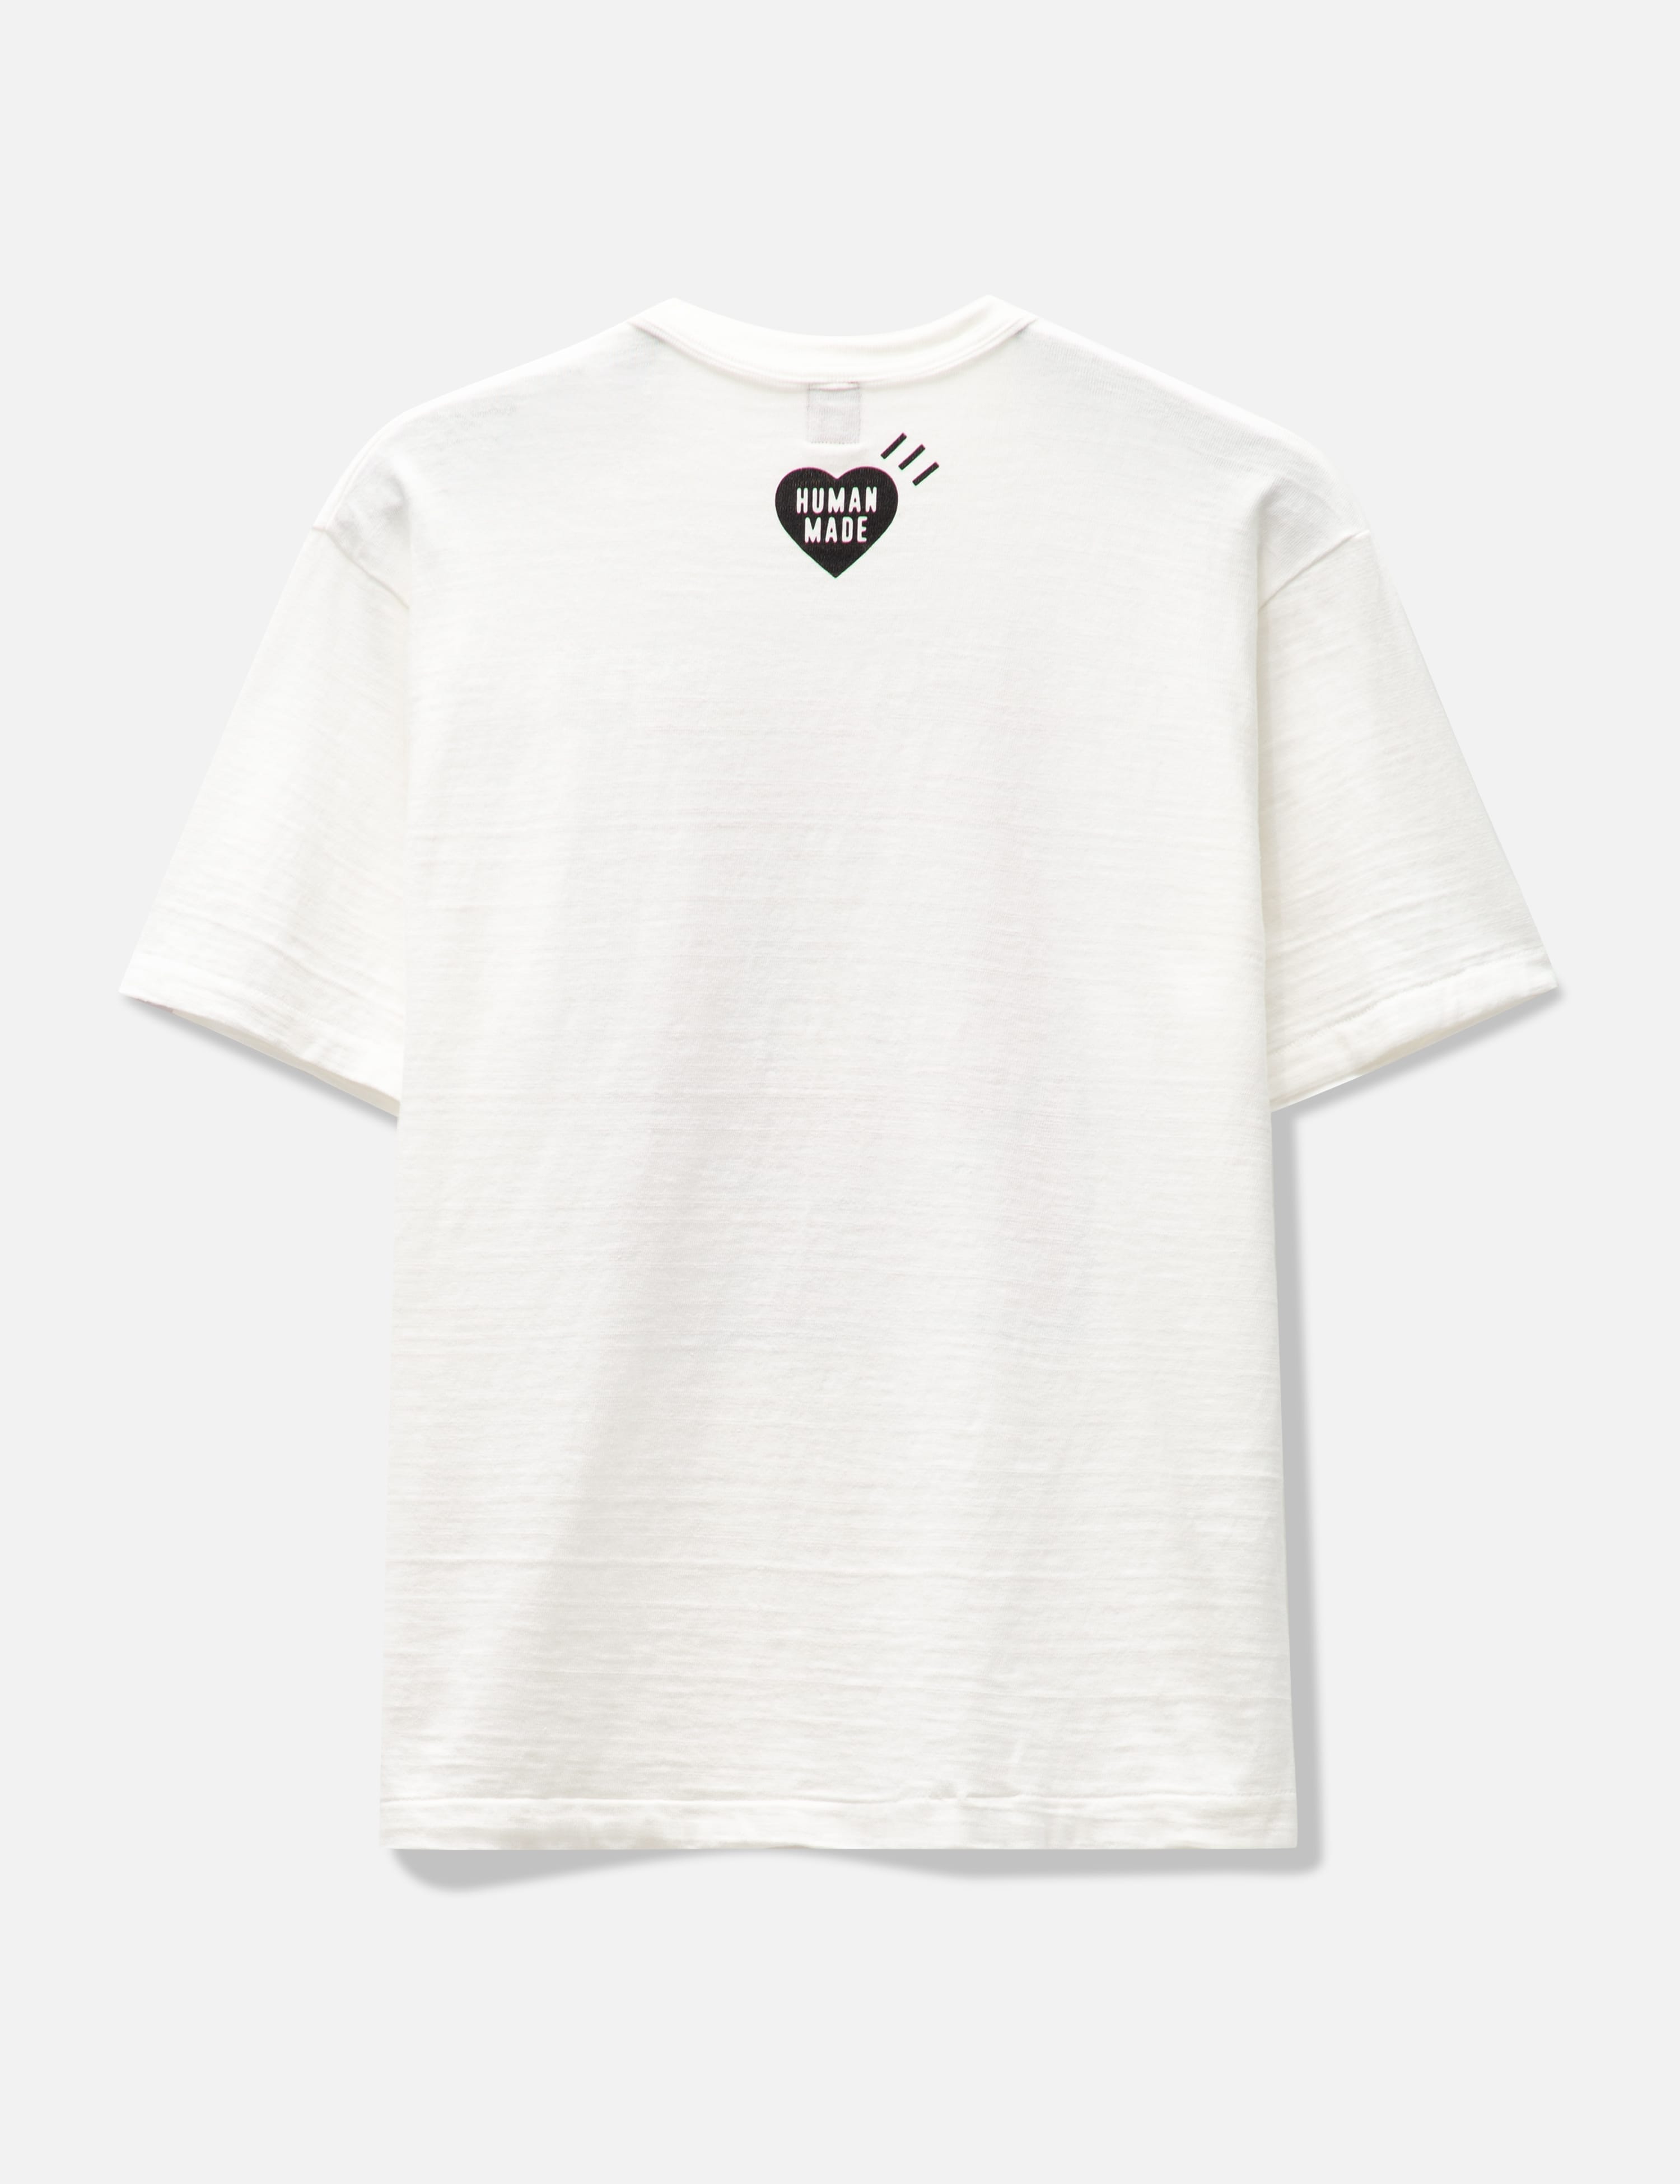 Human Made - GRAPHIC T-SHIRT #03 | HBX - Globally Curated Fashion 